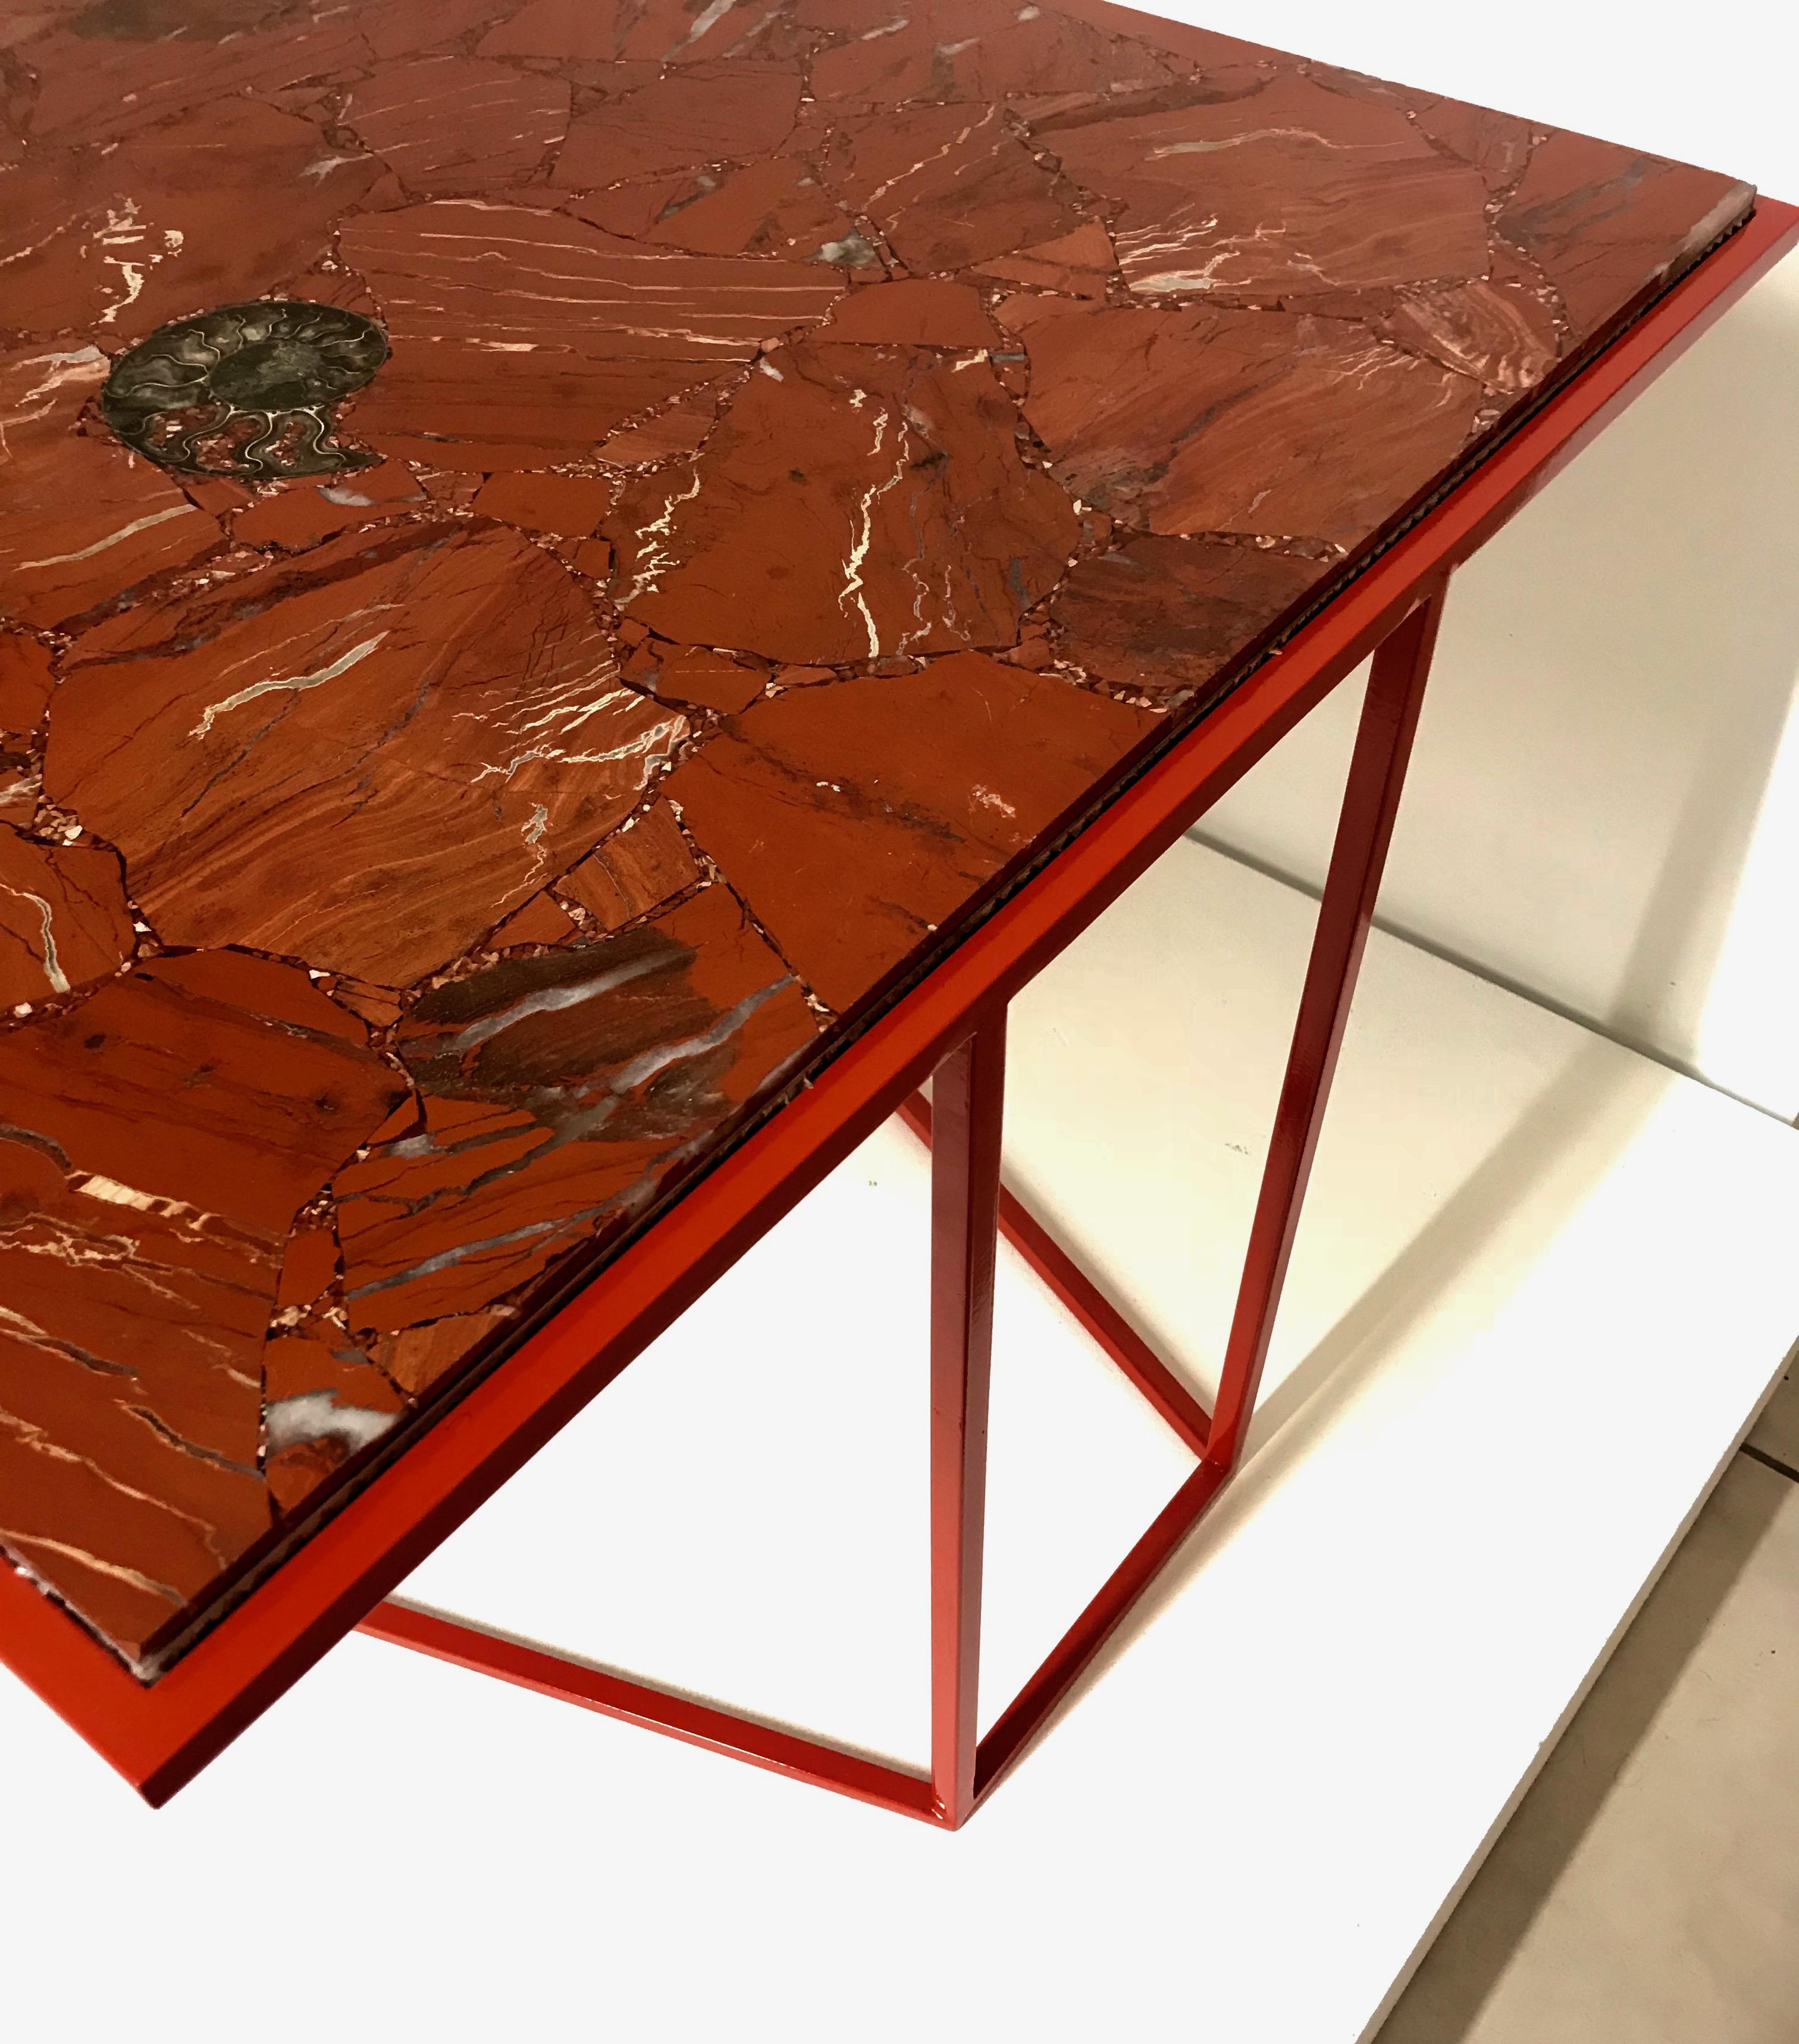 The red jasper cubic cocktail table belongs to our 'Cubic' collection. It is a beautiful and sculptural piece comprising a square shaped red jasper gemstone slab which sits upon a red hand welded sculptural base. 

It presents a visually